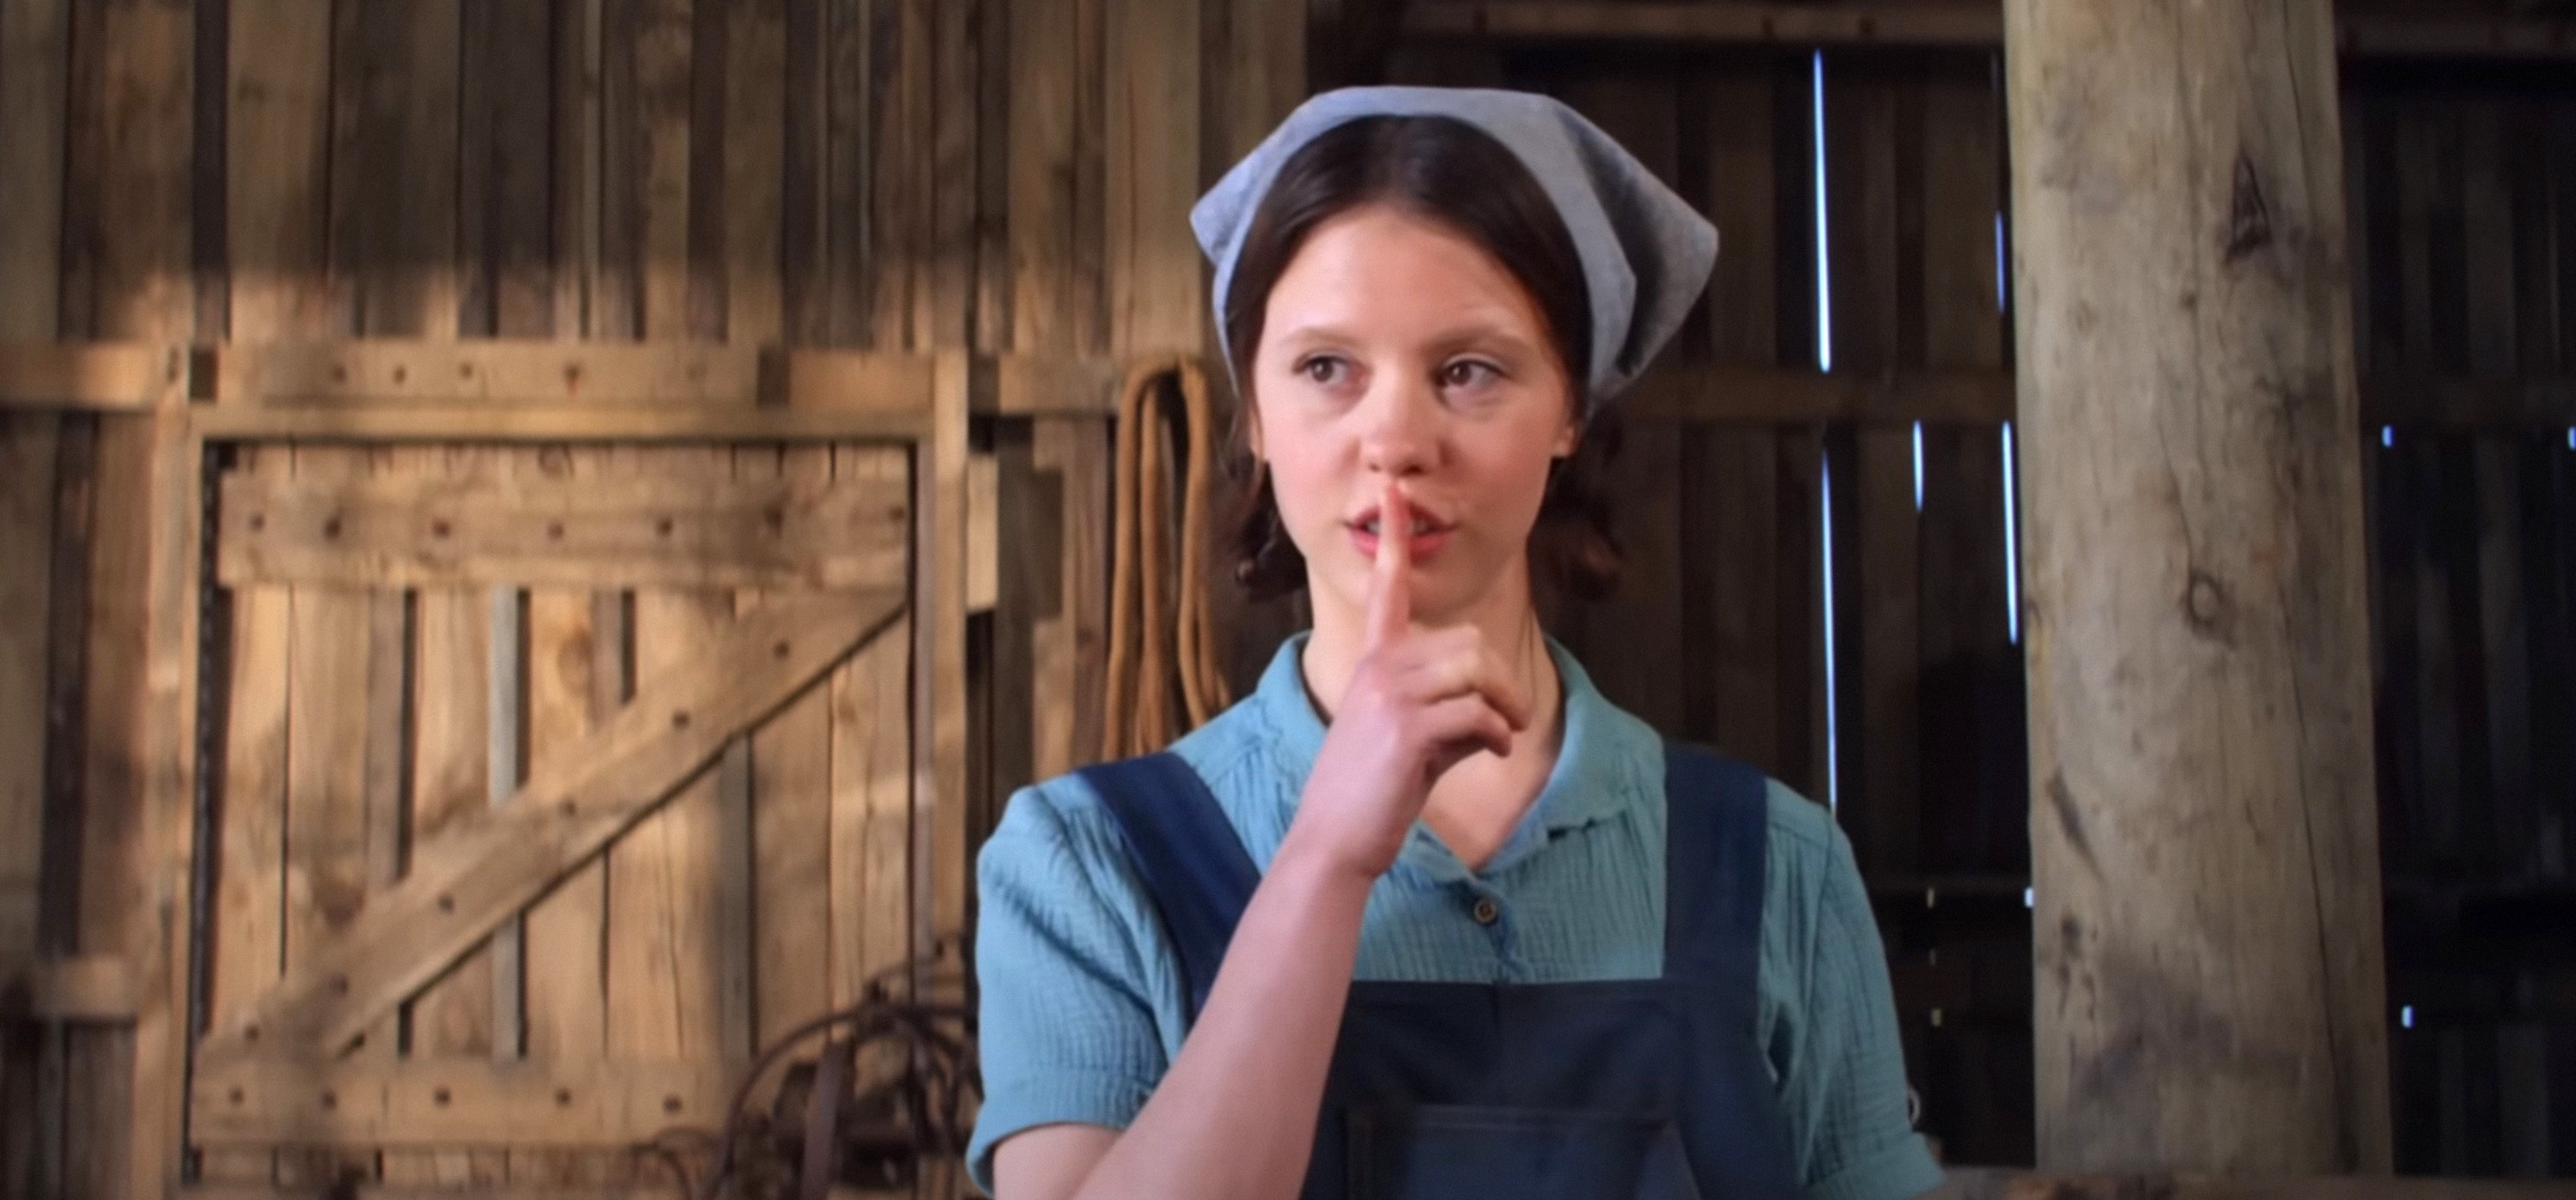 Mia Goth dressed as a farmgirl with overalls and a scarf on her head